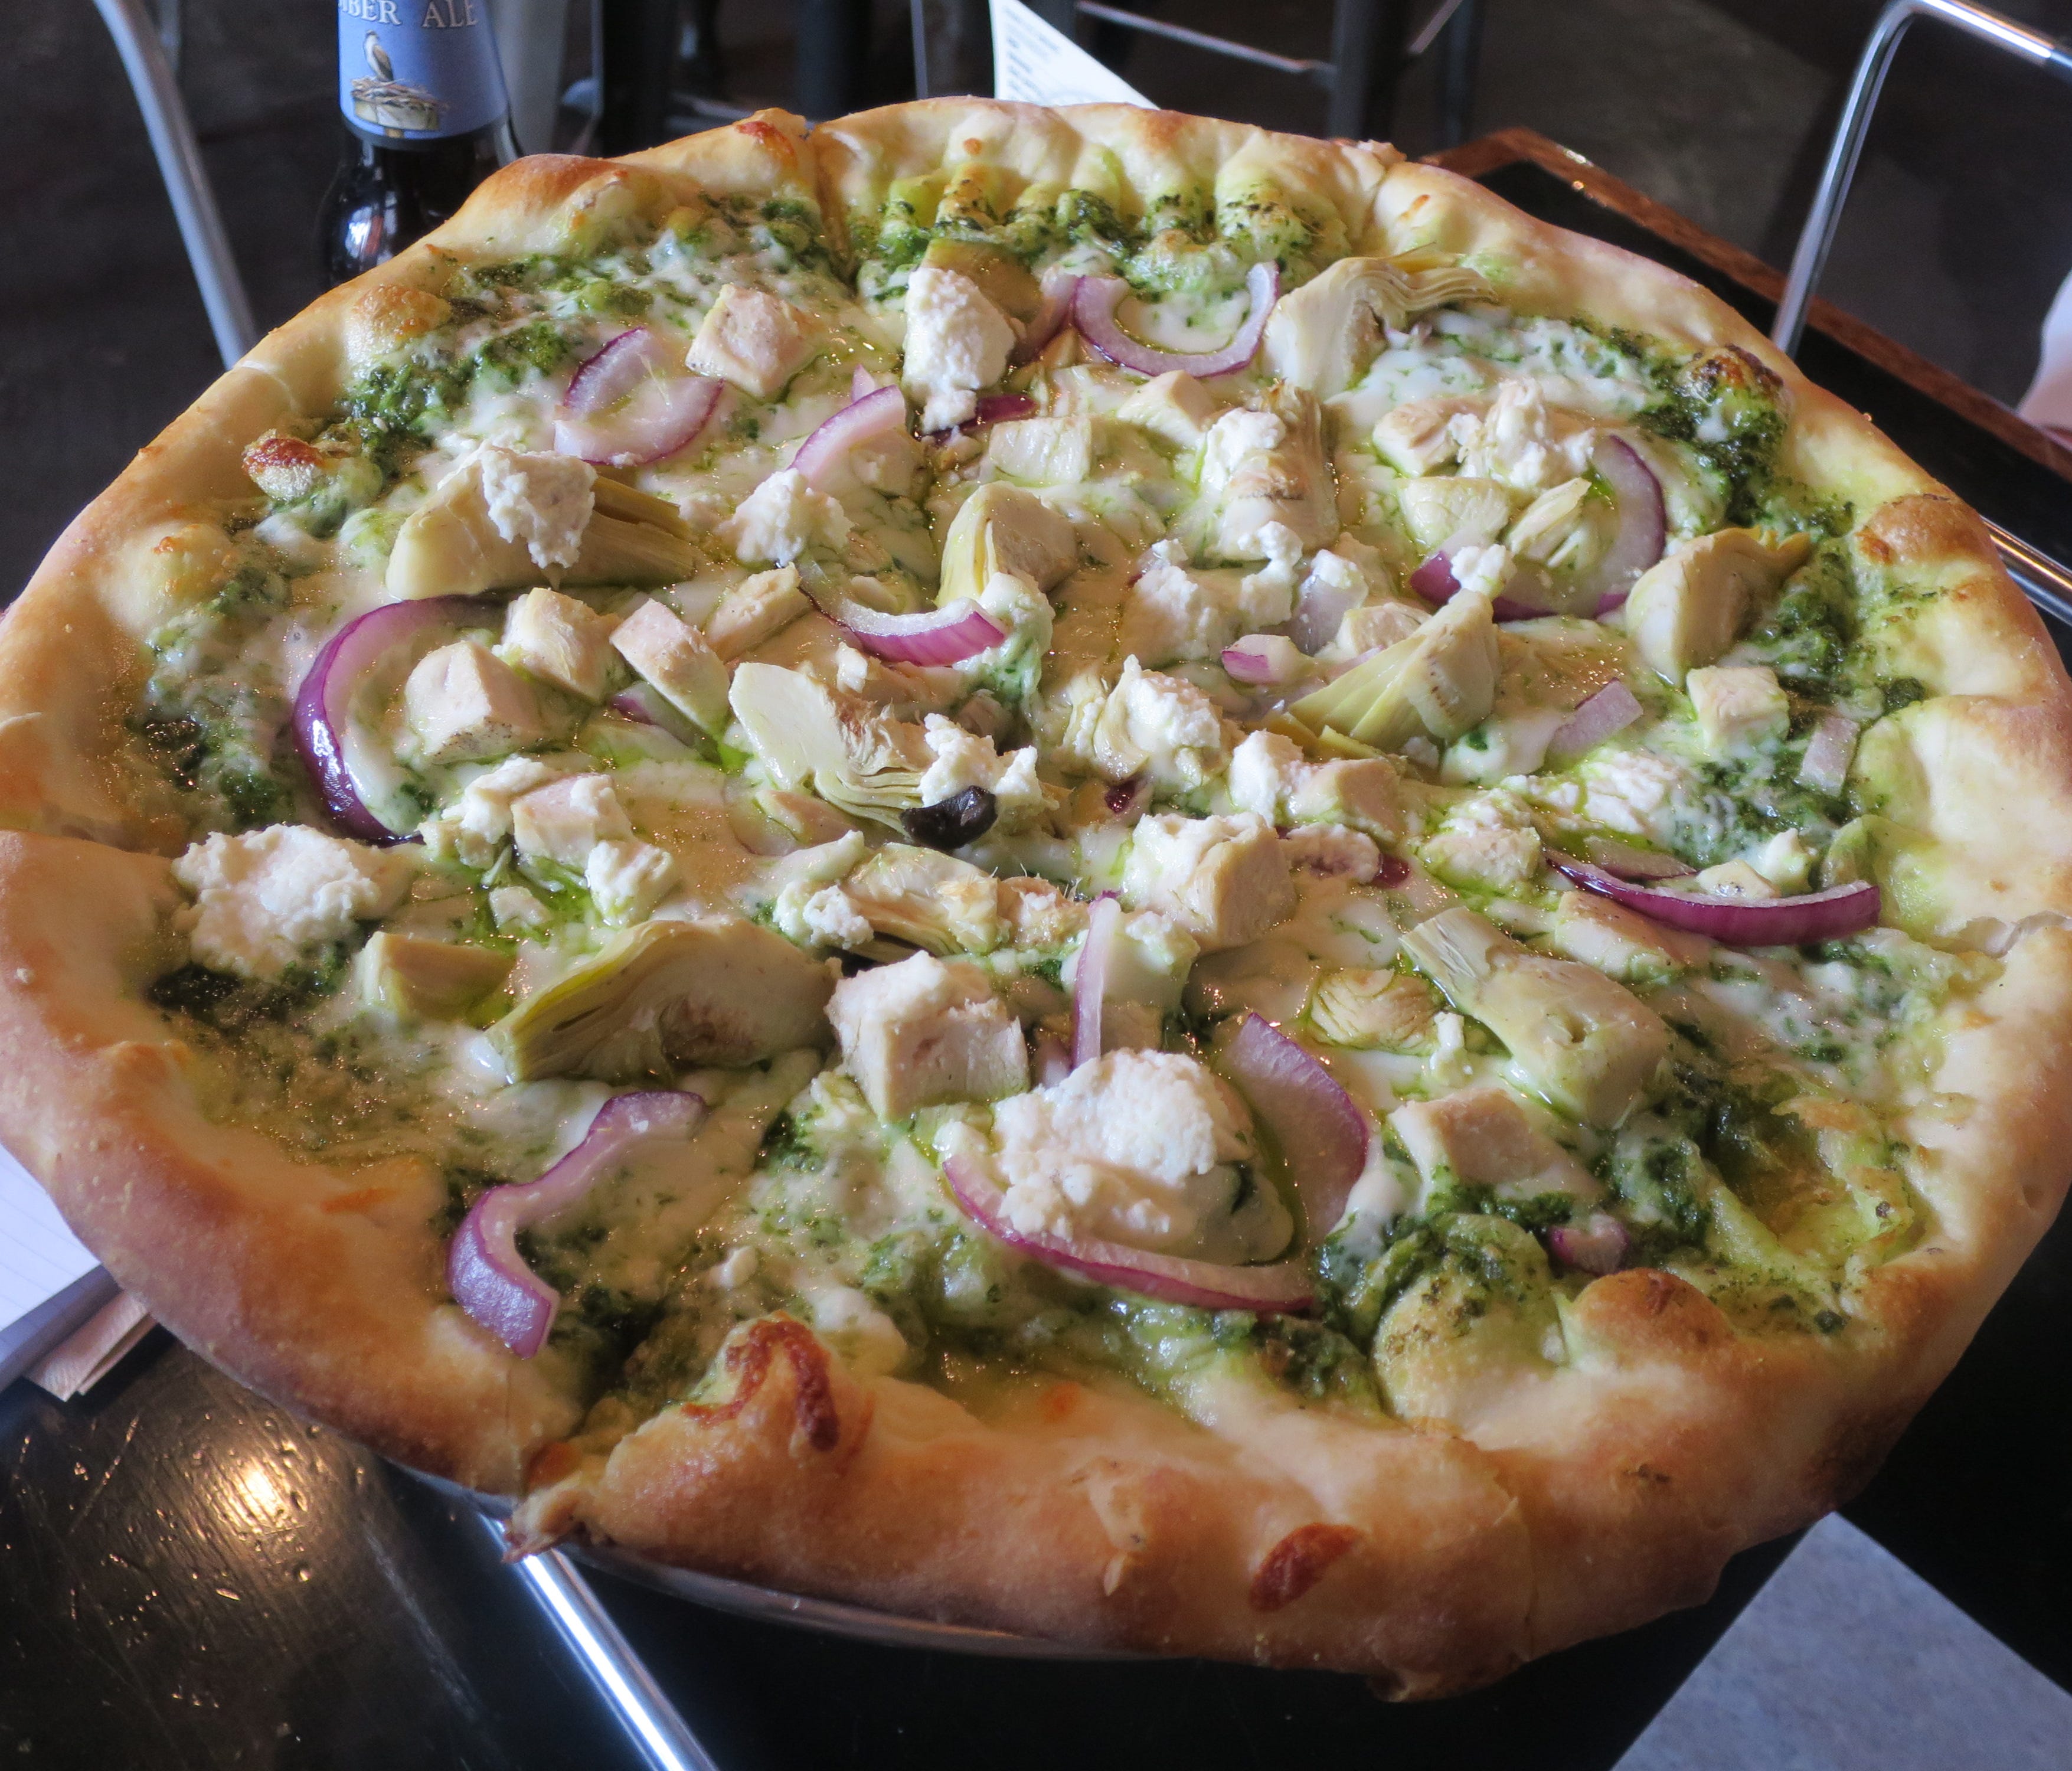 The pizza Guy Fieri made famous on his TV show, 'Diners, Drive-Ins and Dives', is The Funky Chicken, with roasted chicken, artichoke hearts, red onions and ricotta cheese, on a layer of made-from-scratch basil pesto.